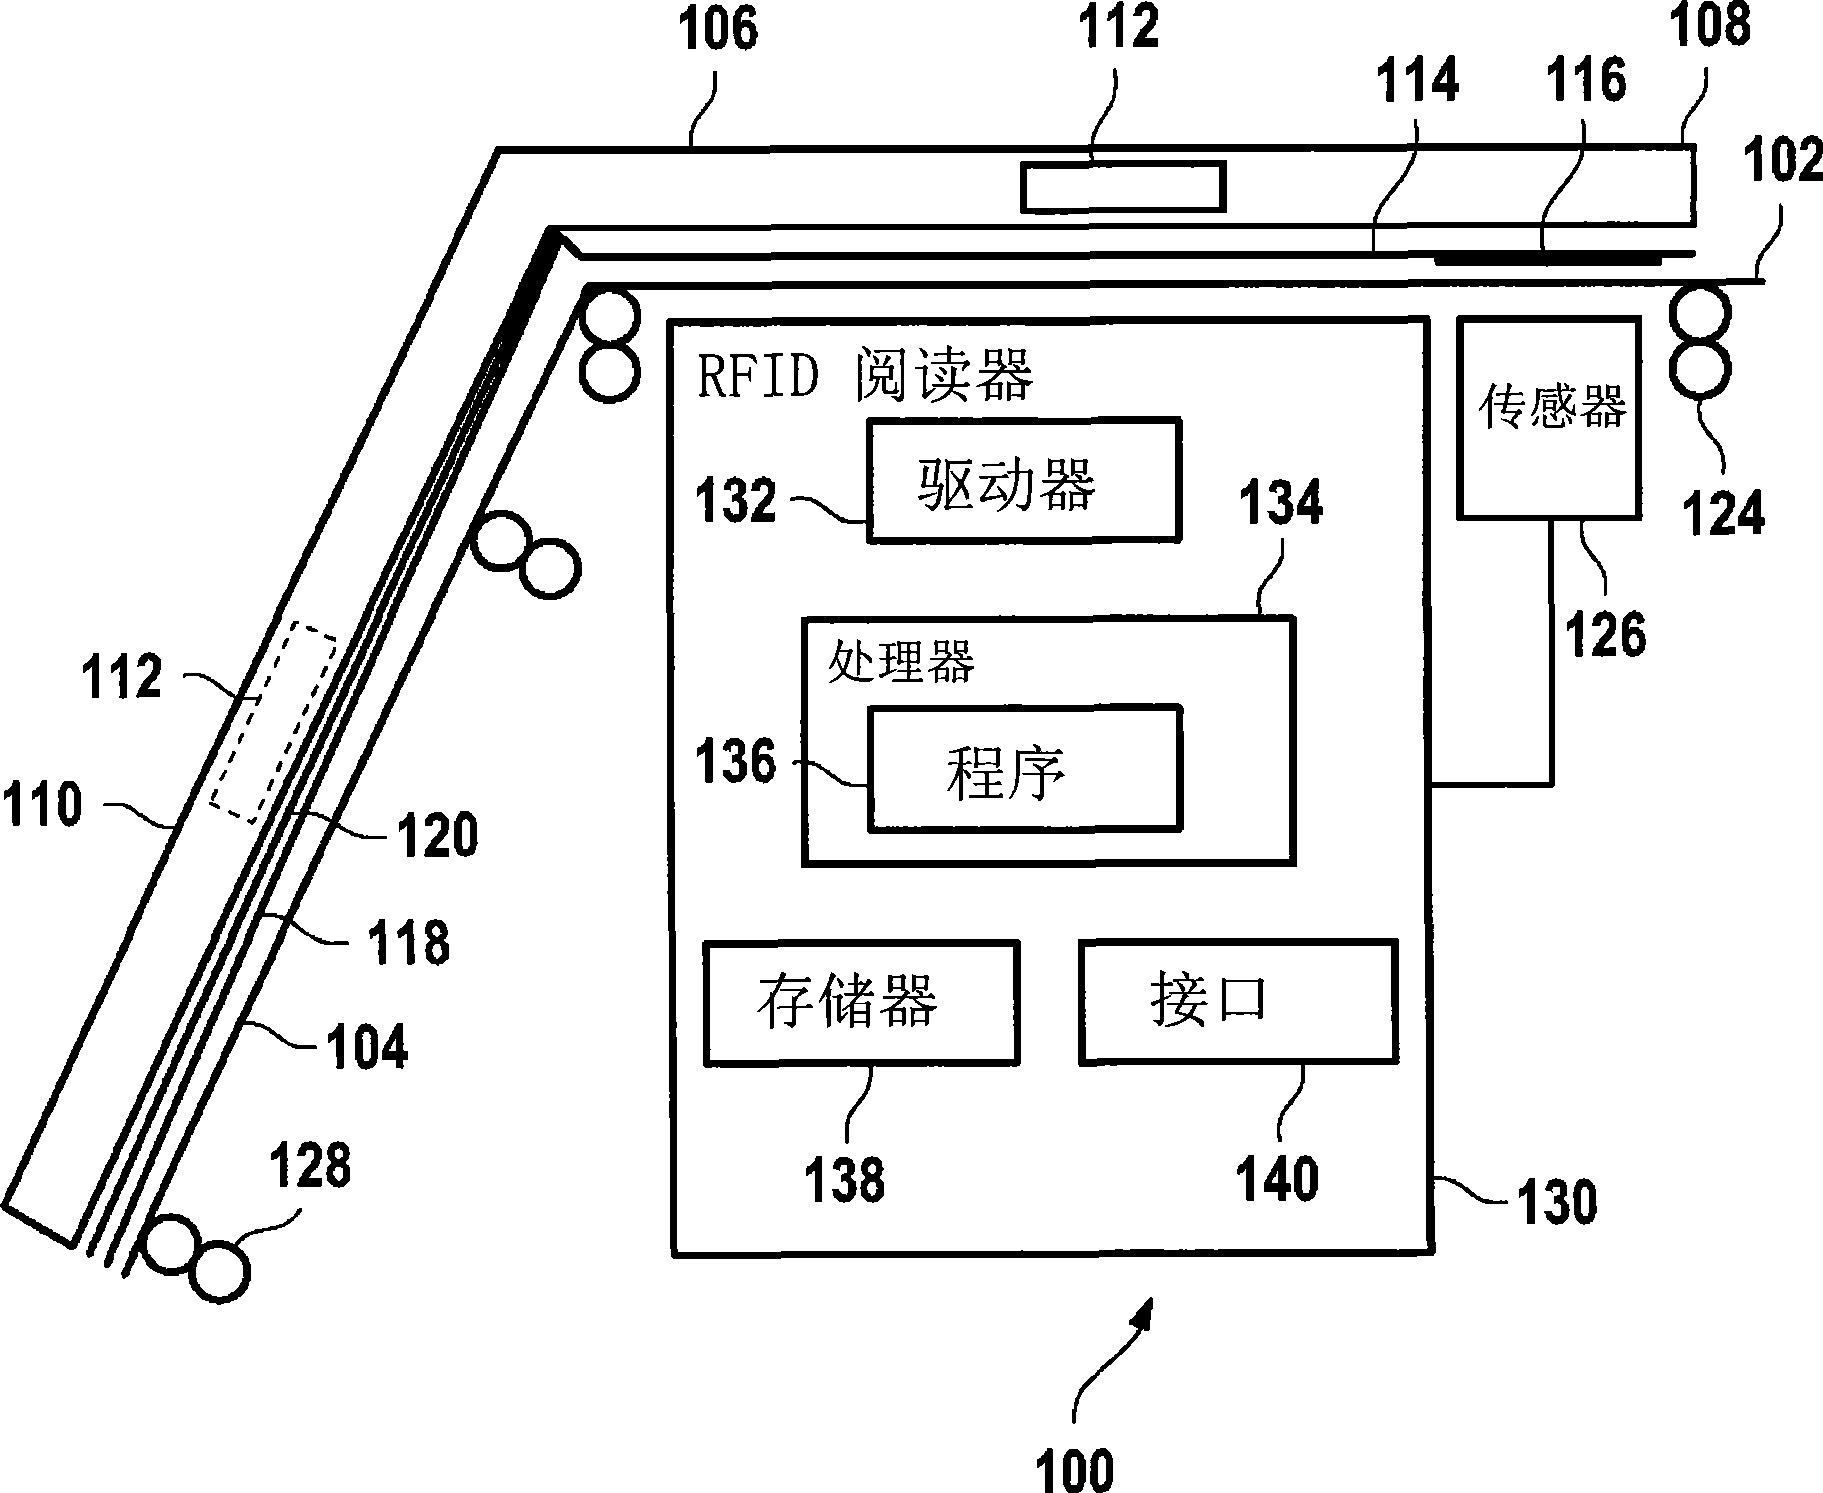 RFID reading device for a document